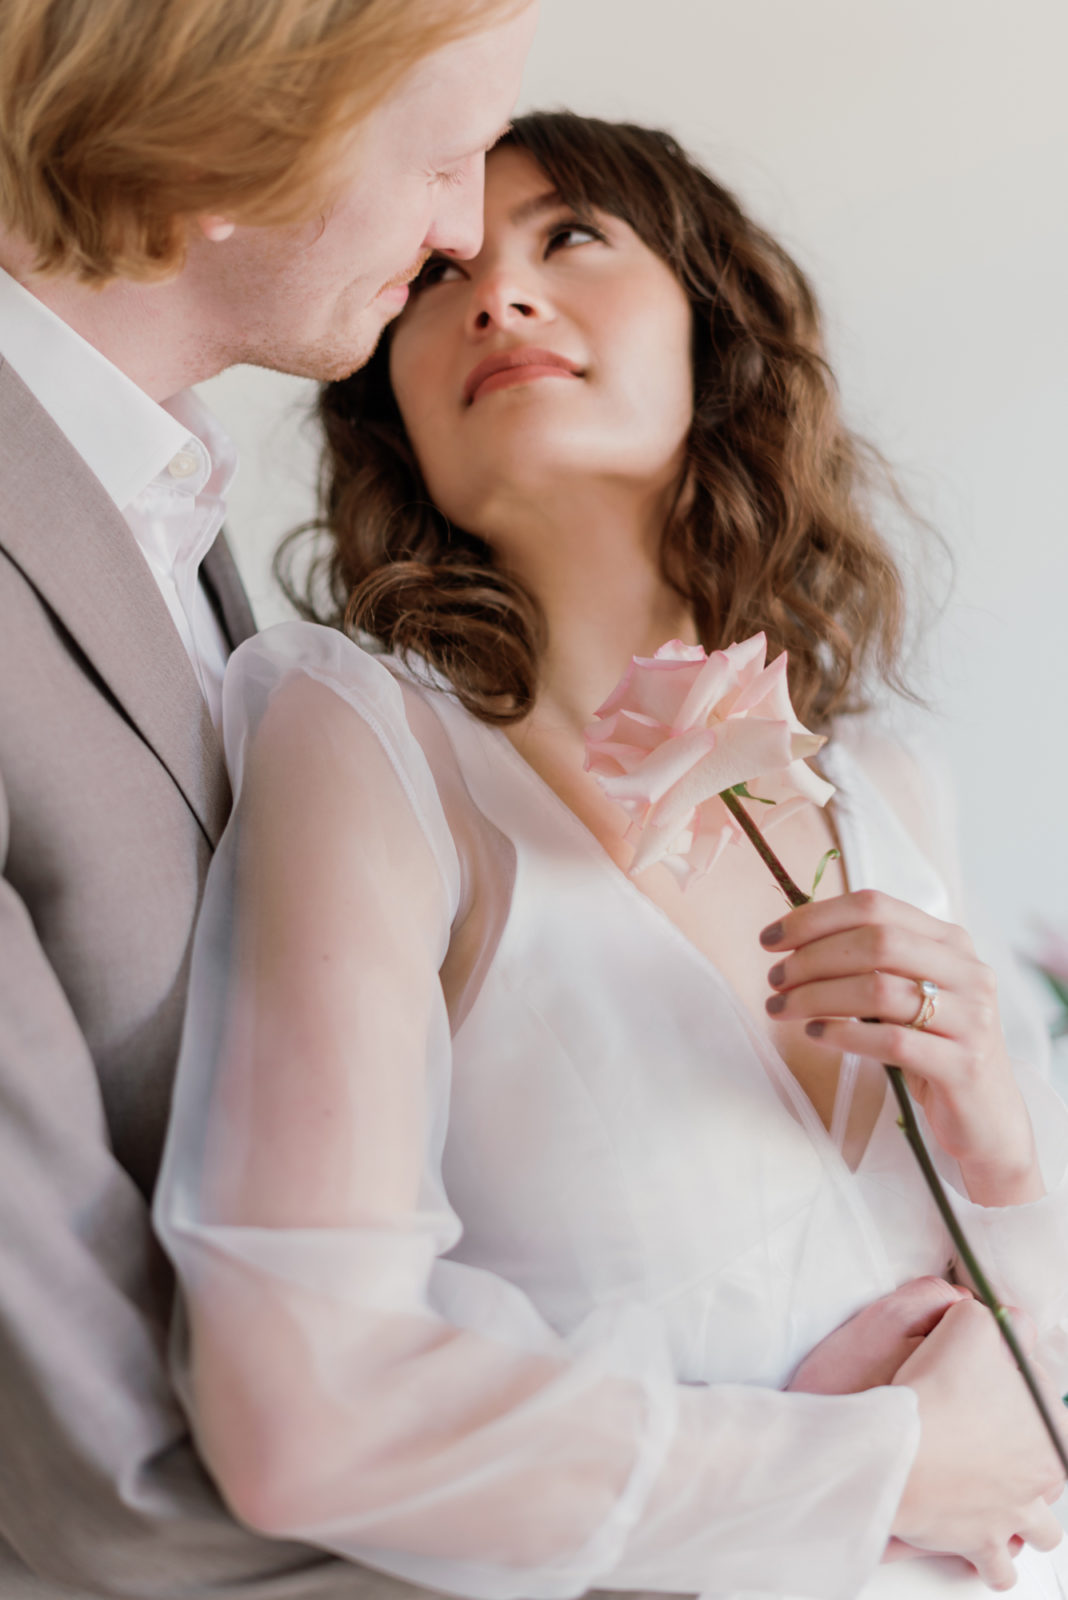 Modern bride and groom wedding attire inspiration with a grey suit and sheer sleeves